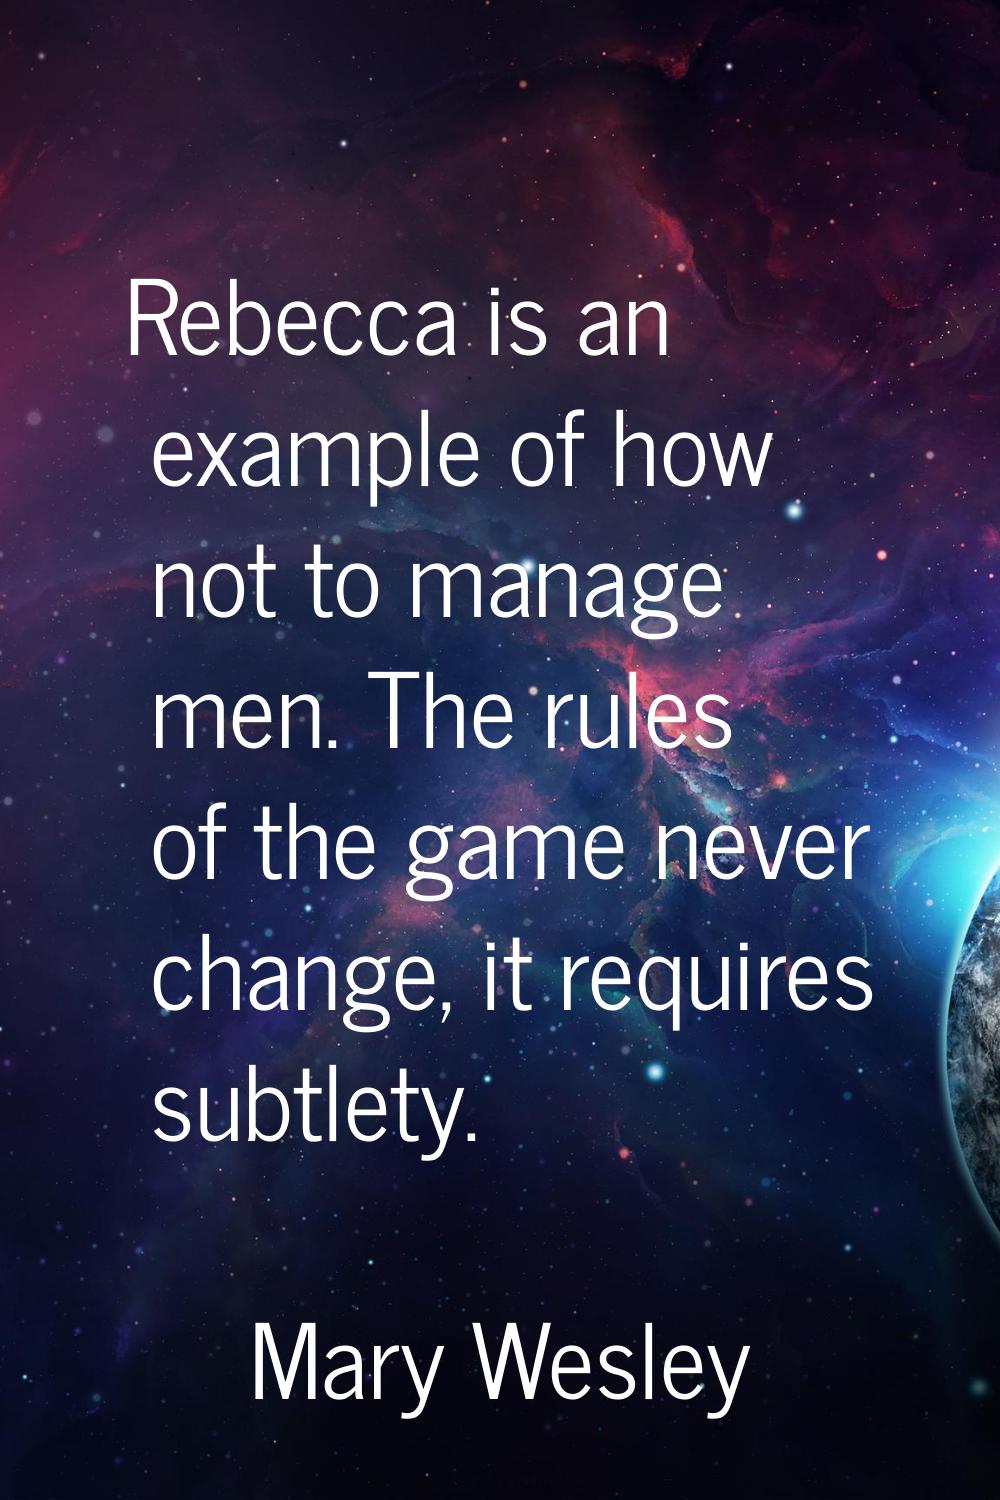 Rebecca is an example of how not to manage men. The rules of the game never change, it requires sub